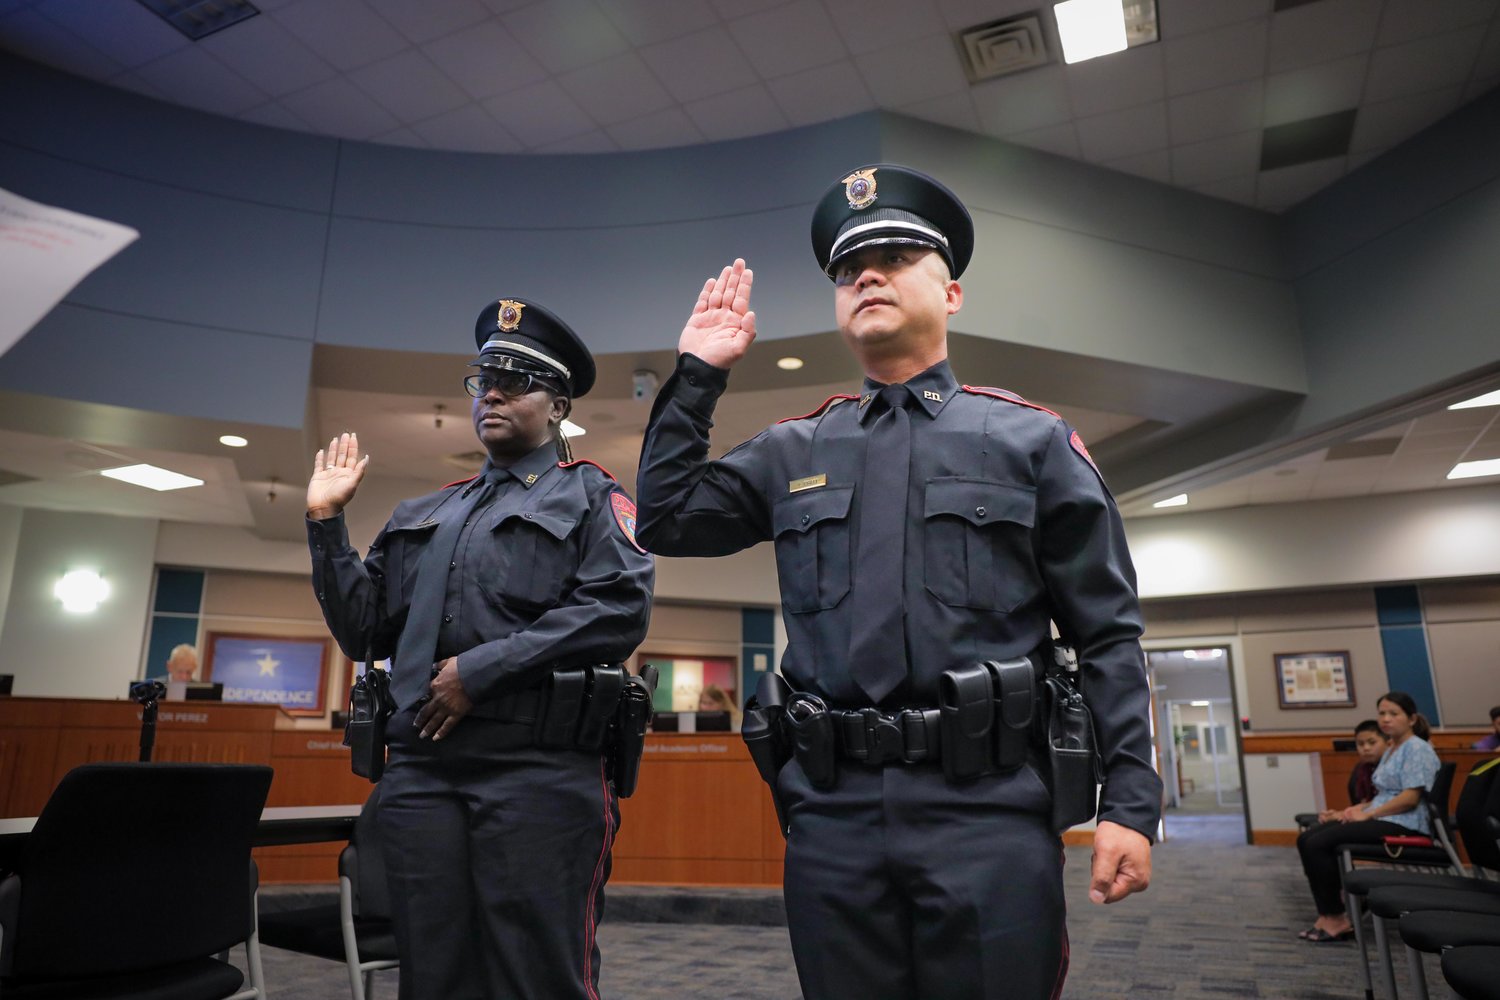 wo new Katy ISD police officers, Doreen E. Duclair, left, and Vinh Q. Pham, took their oaths of office at Monday’s trustees meeting.